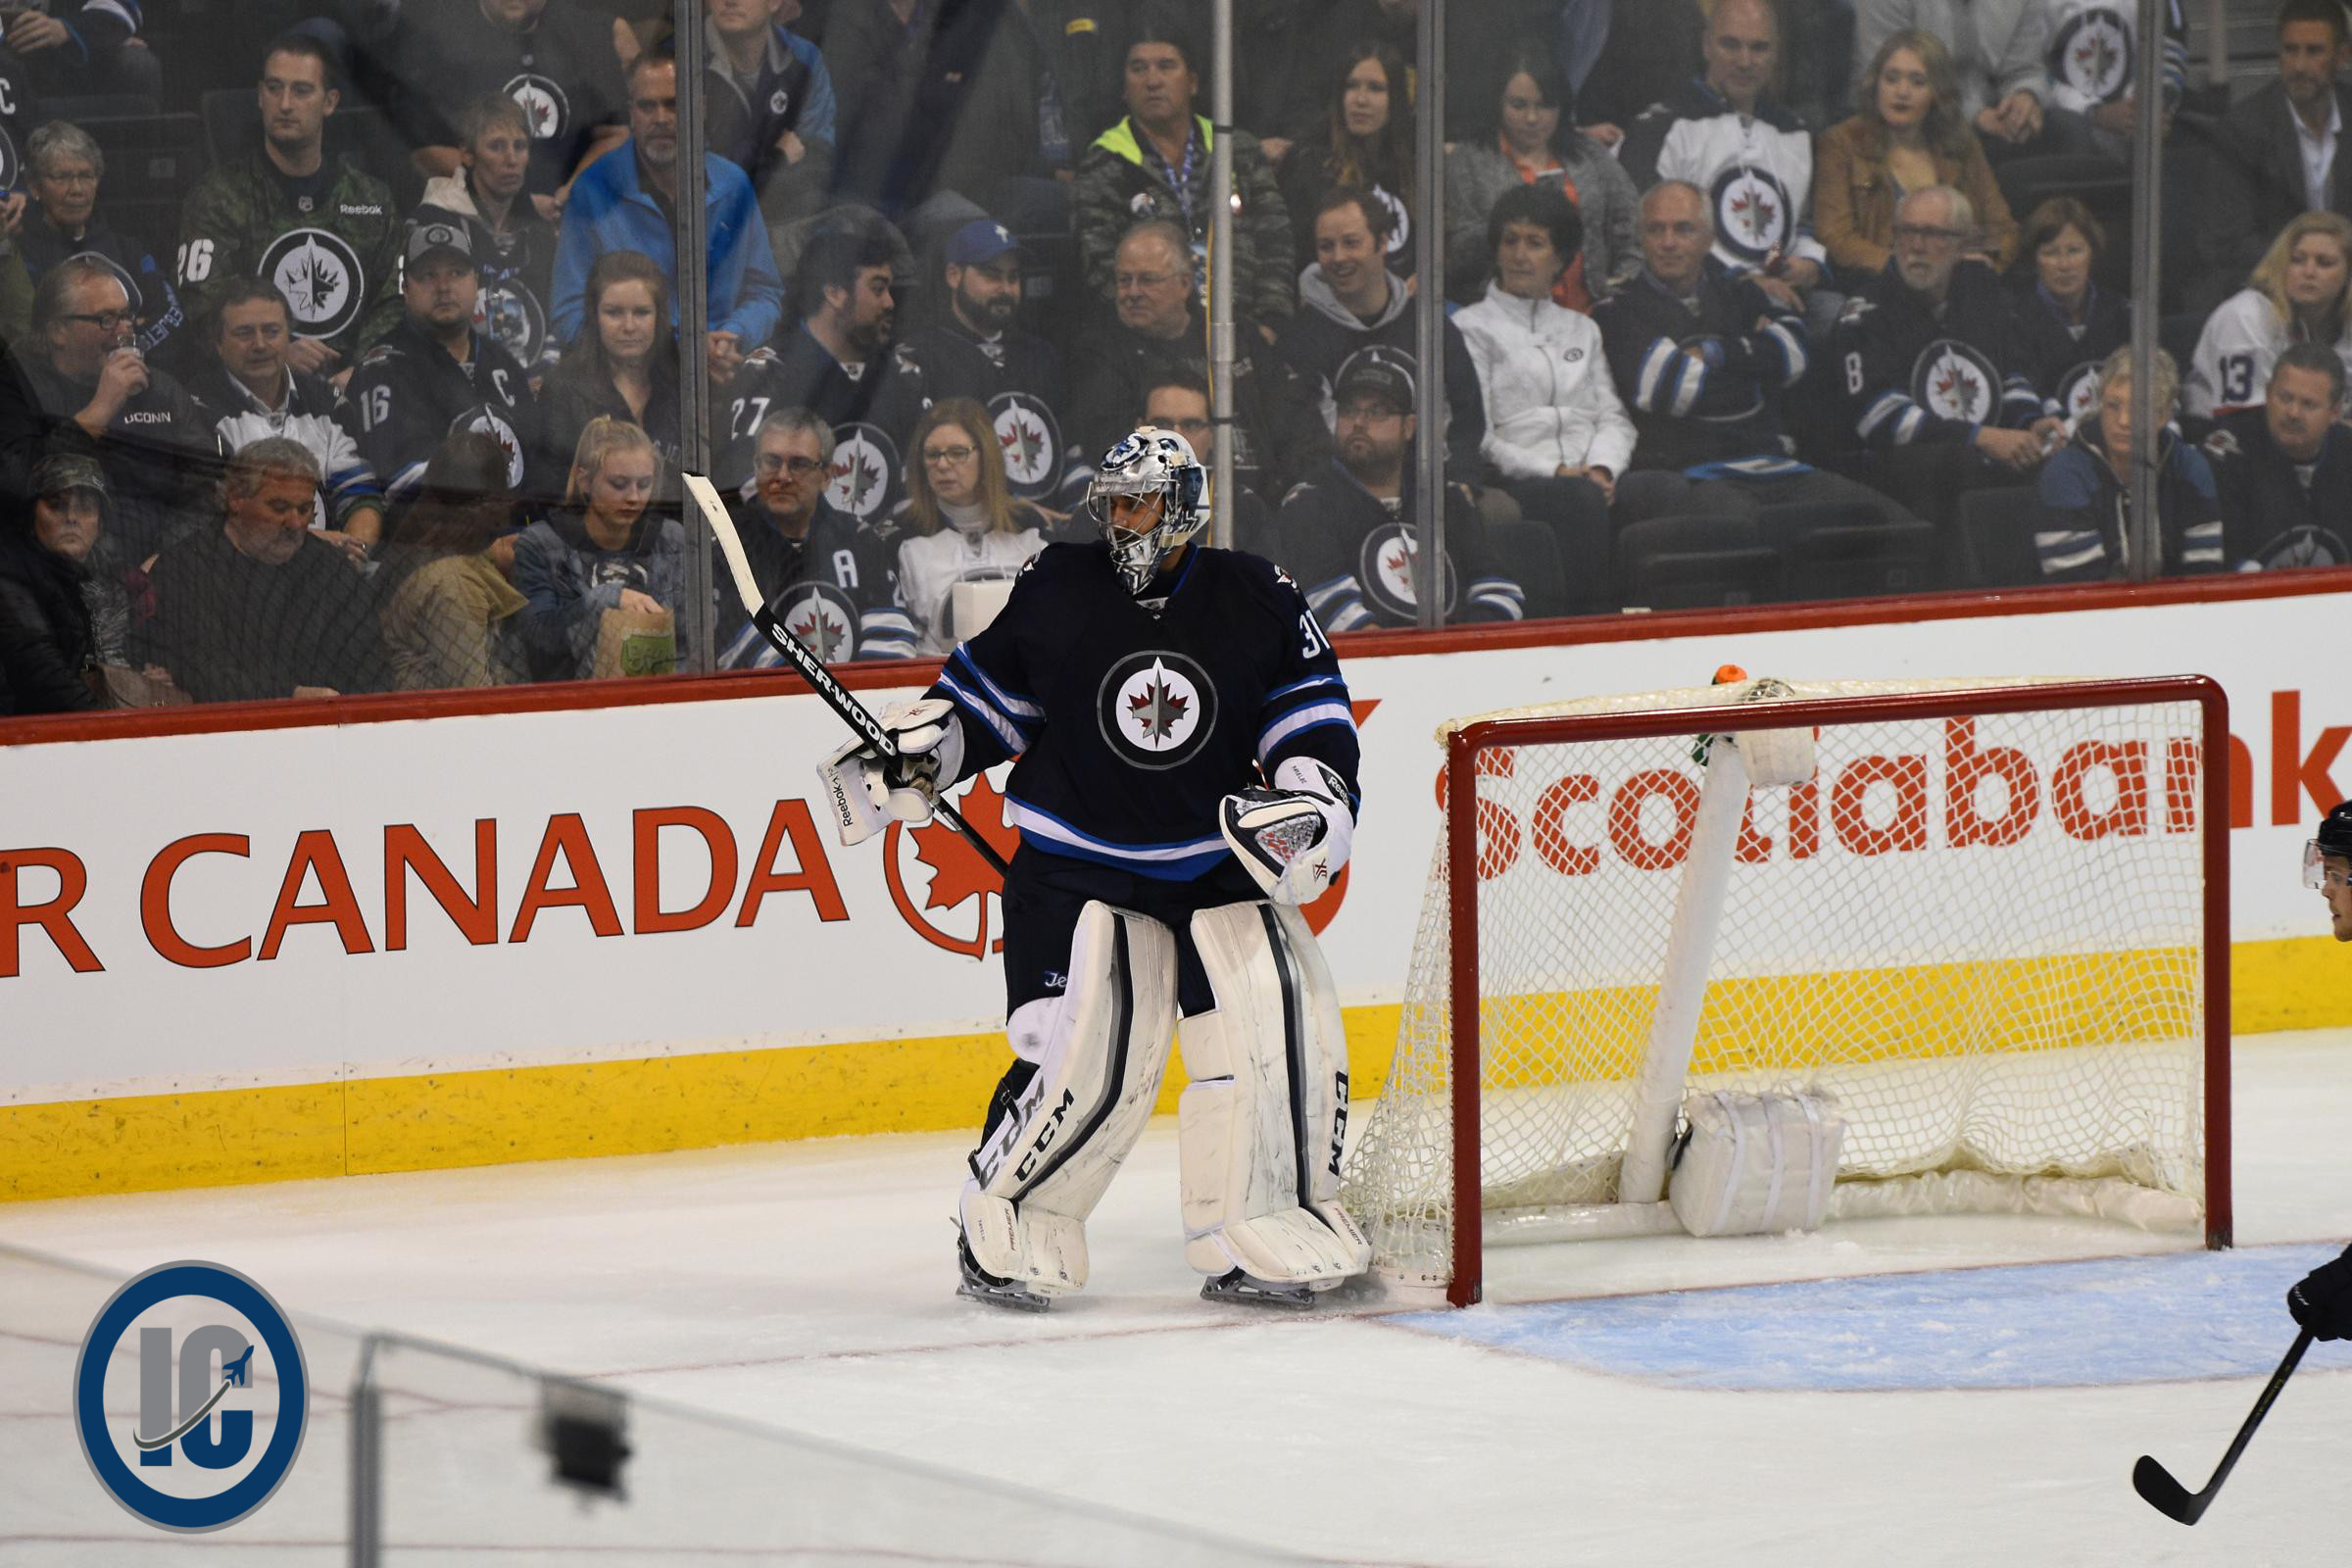 Pavelec clears the puck